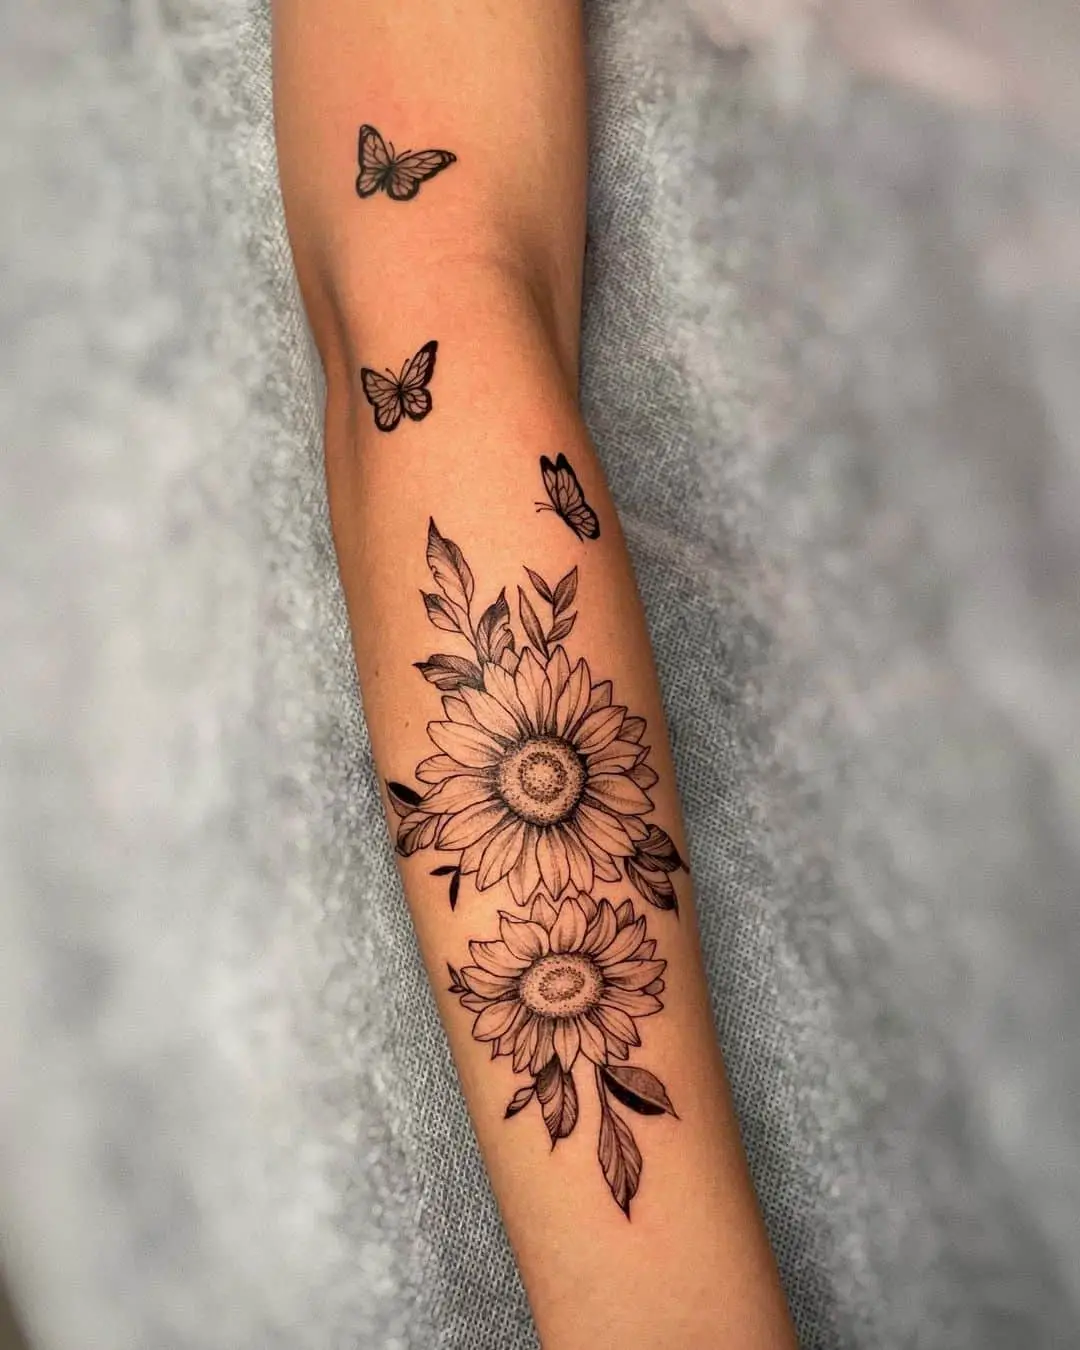 Black and grey Sunflower with Butterfly Tattoo